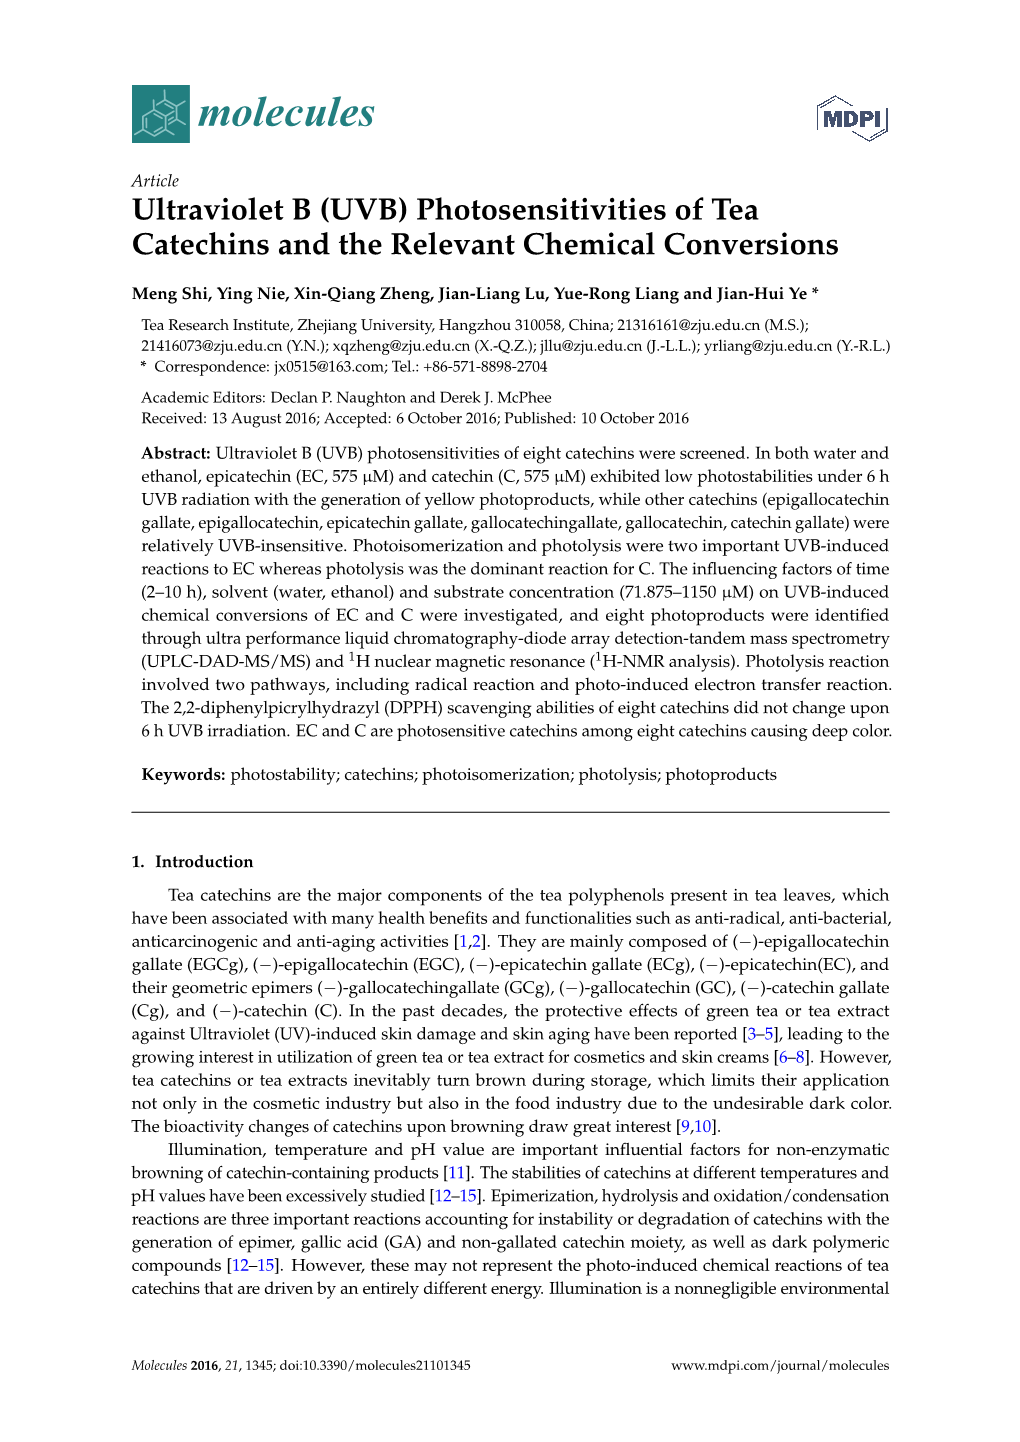 Ultraviolet B (UVB) Photosensitivities of Tea Catechins and the Relevant Chemical Conversions